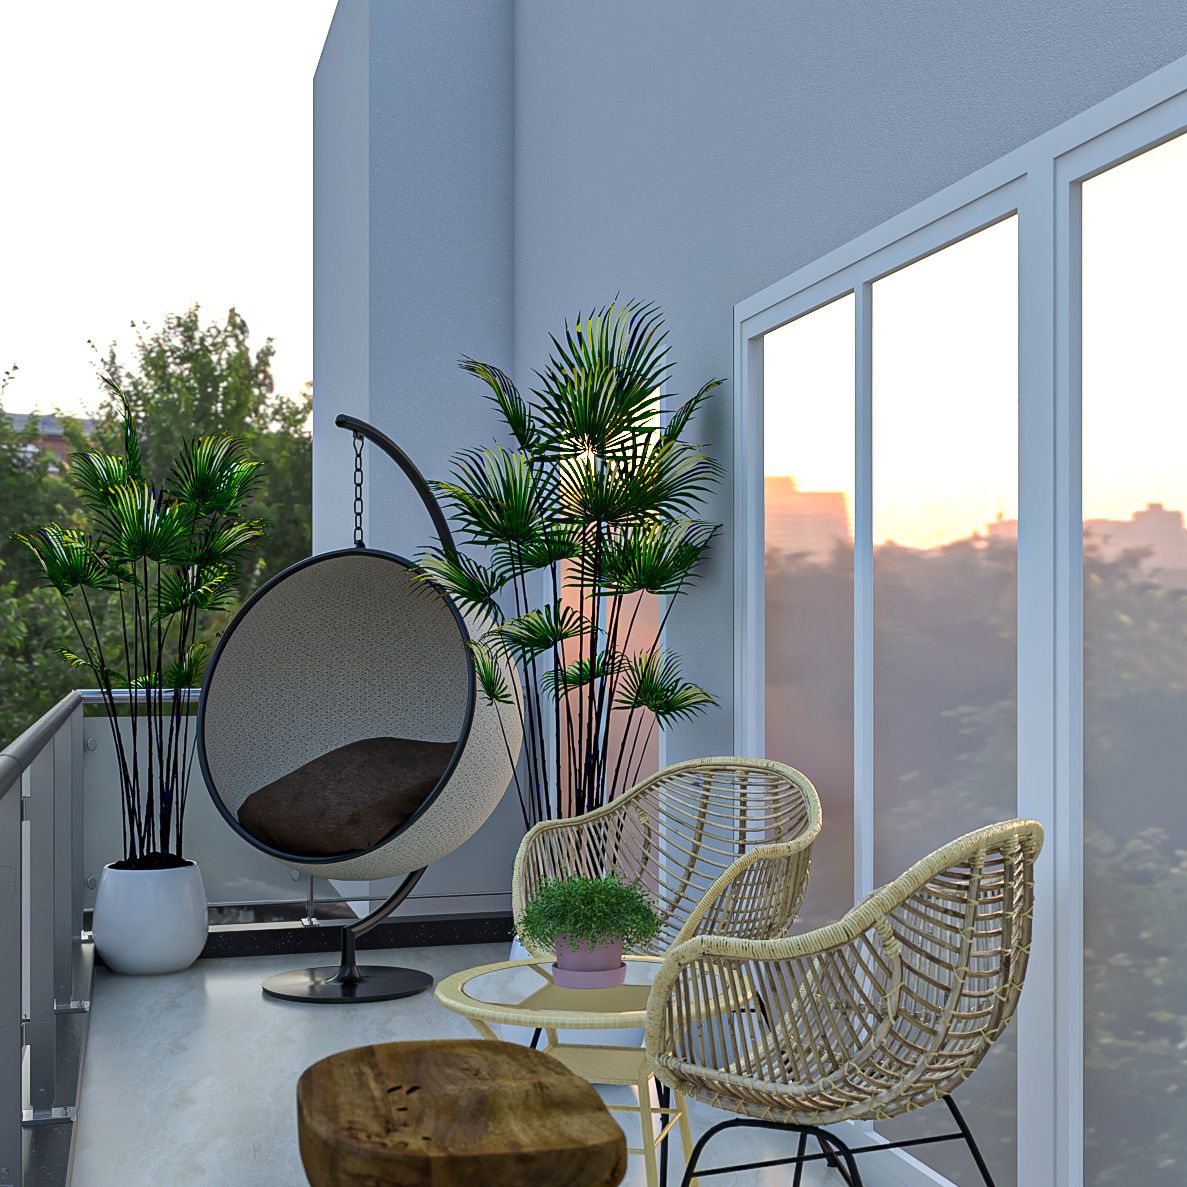 Contemporary Balcony Design With Nest Swing And Cane Furniture